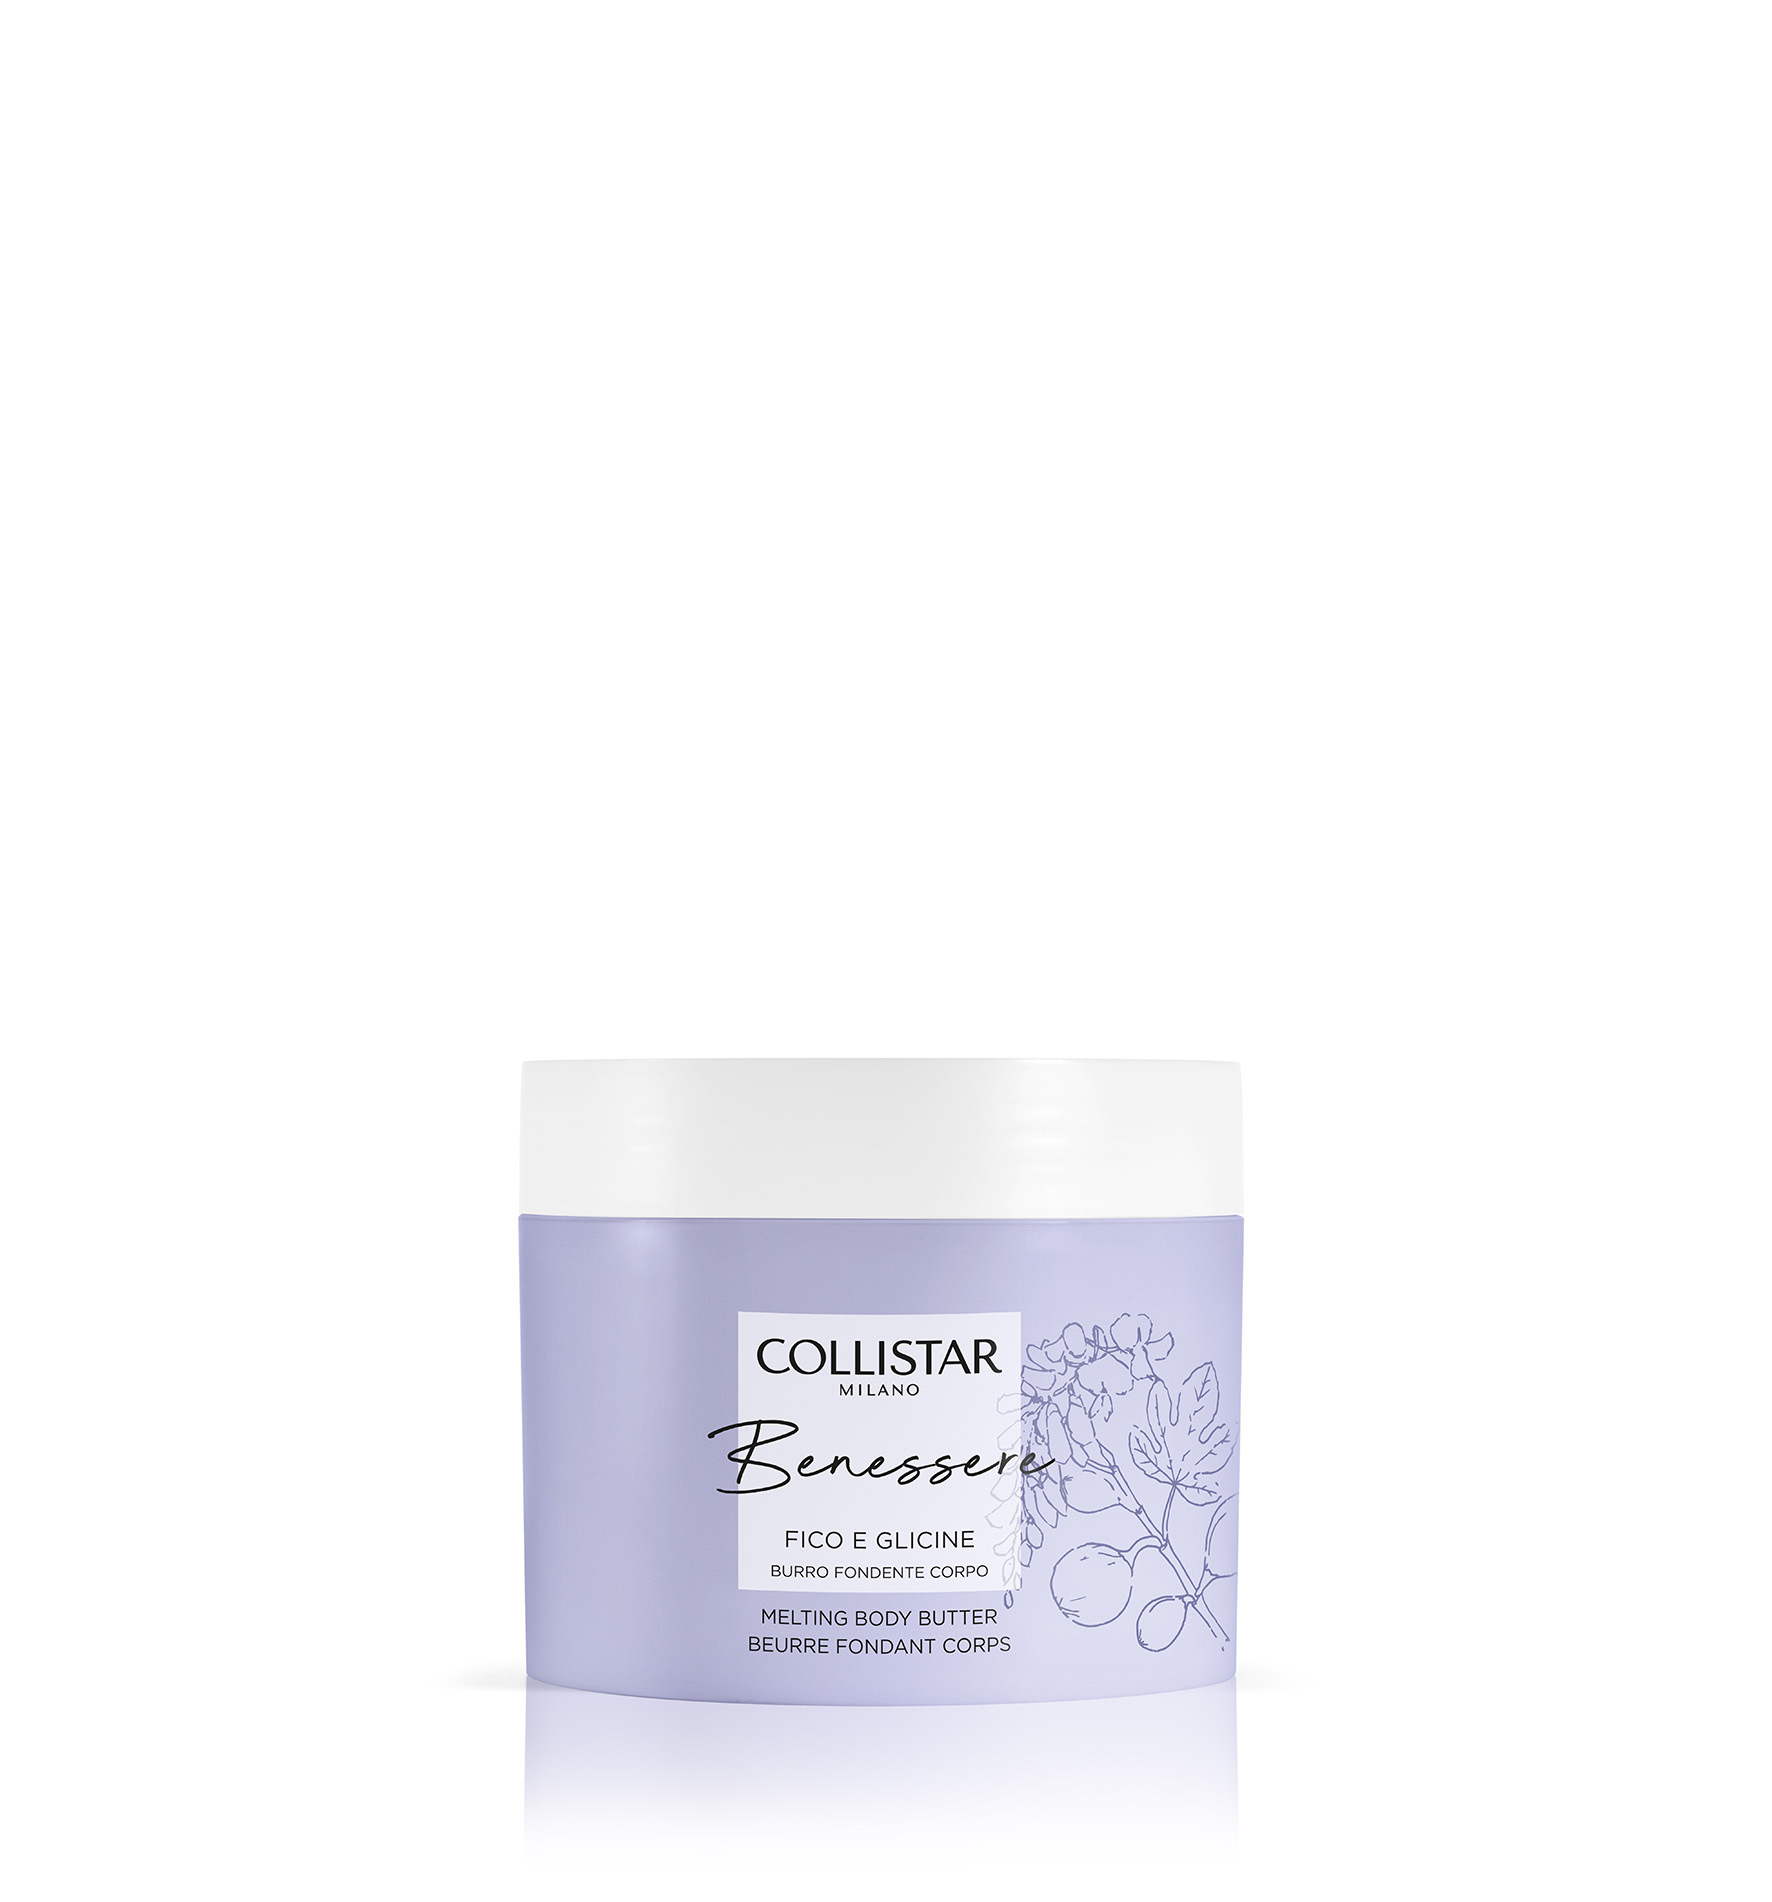 BENESSERE FIG AND WISTERIA MELTING BODY BUTTER - LICHAAM | Collistar - Shop Online Ufficiale